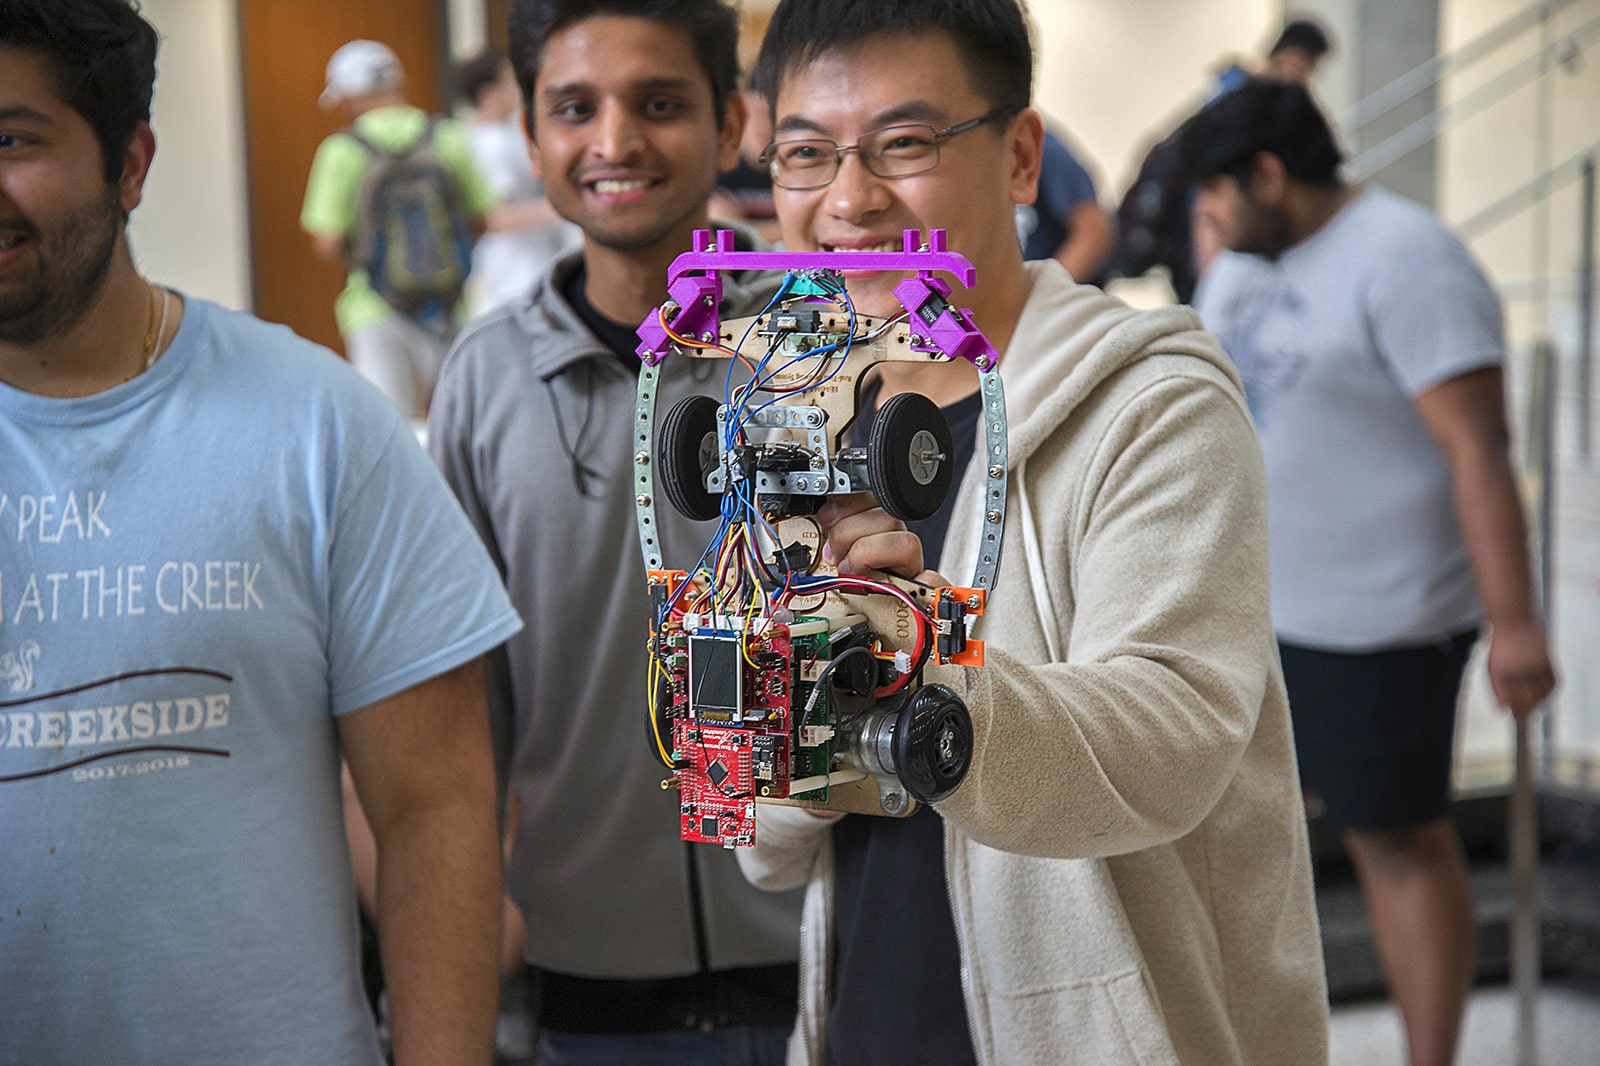 Three smiling Texas electrical and computer engineering students holding robot